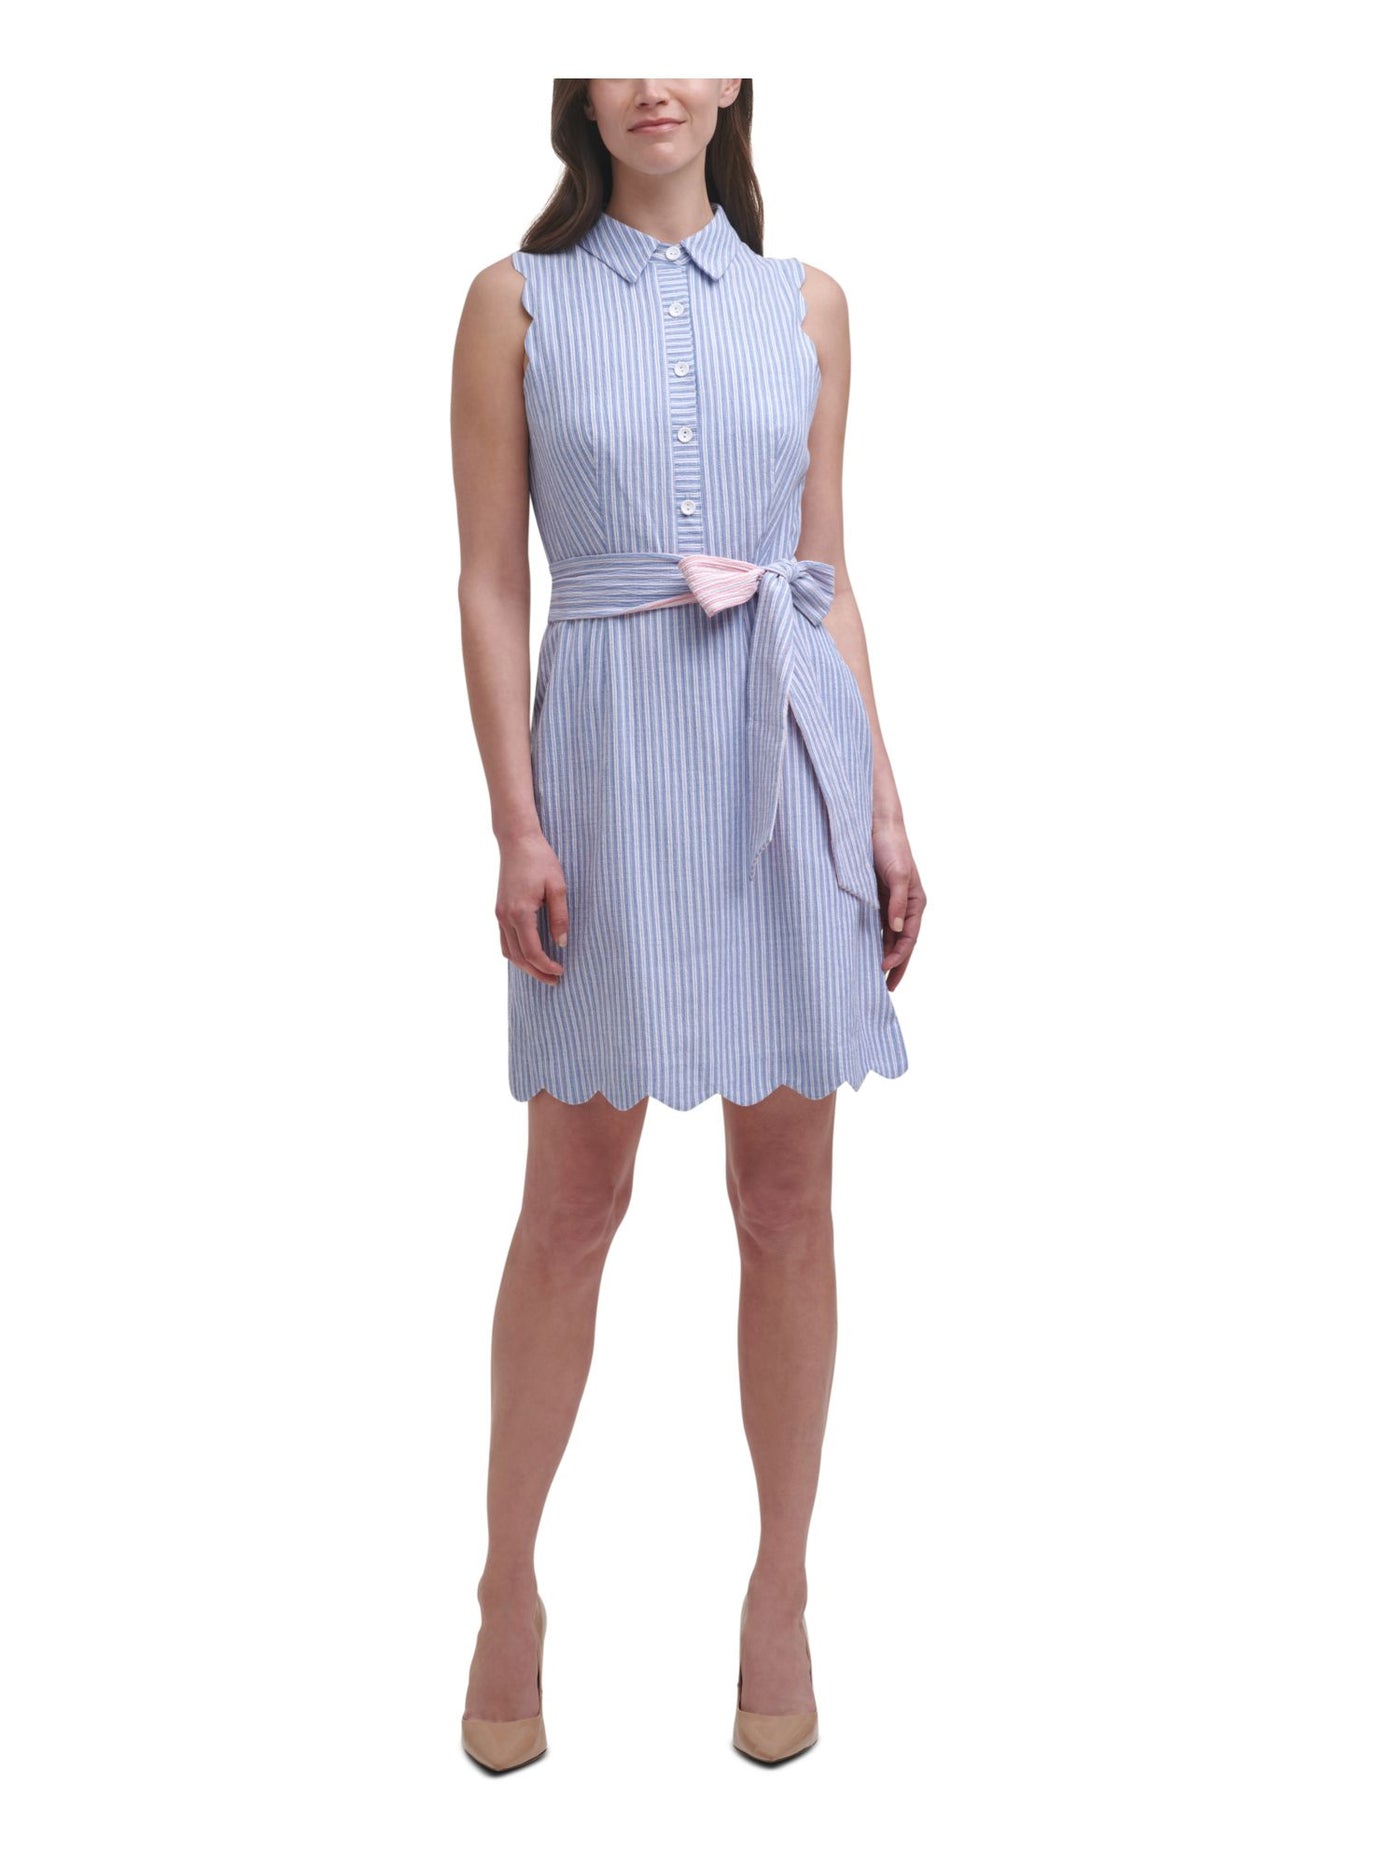 HARPER ROSE Womens Blue Stretch Belted Scalloped Partial Button Closure Striped Sleeveless Point Collar Short Wear To Work Shirt Dress 12